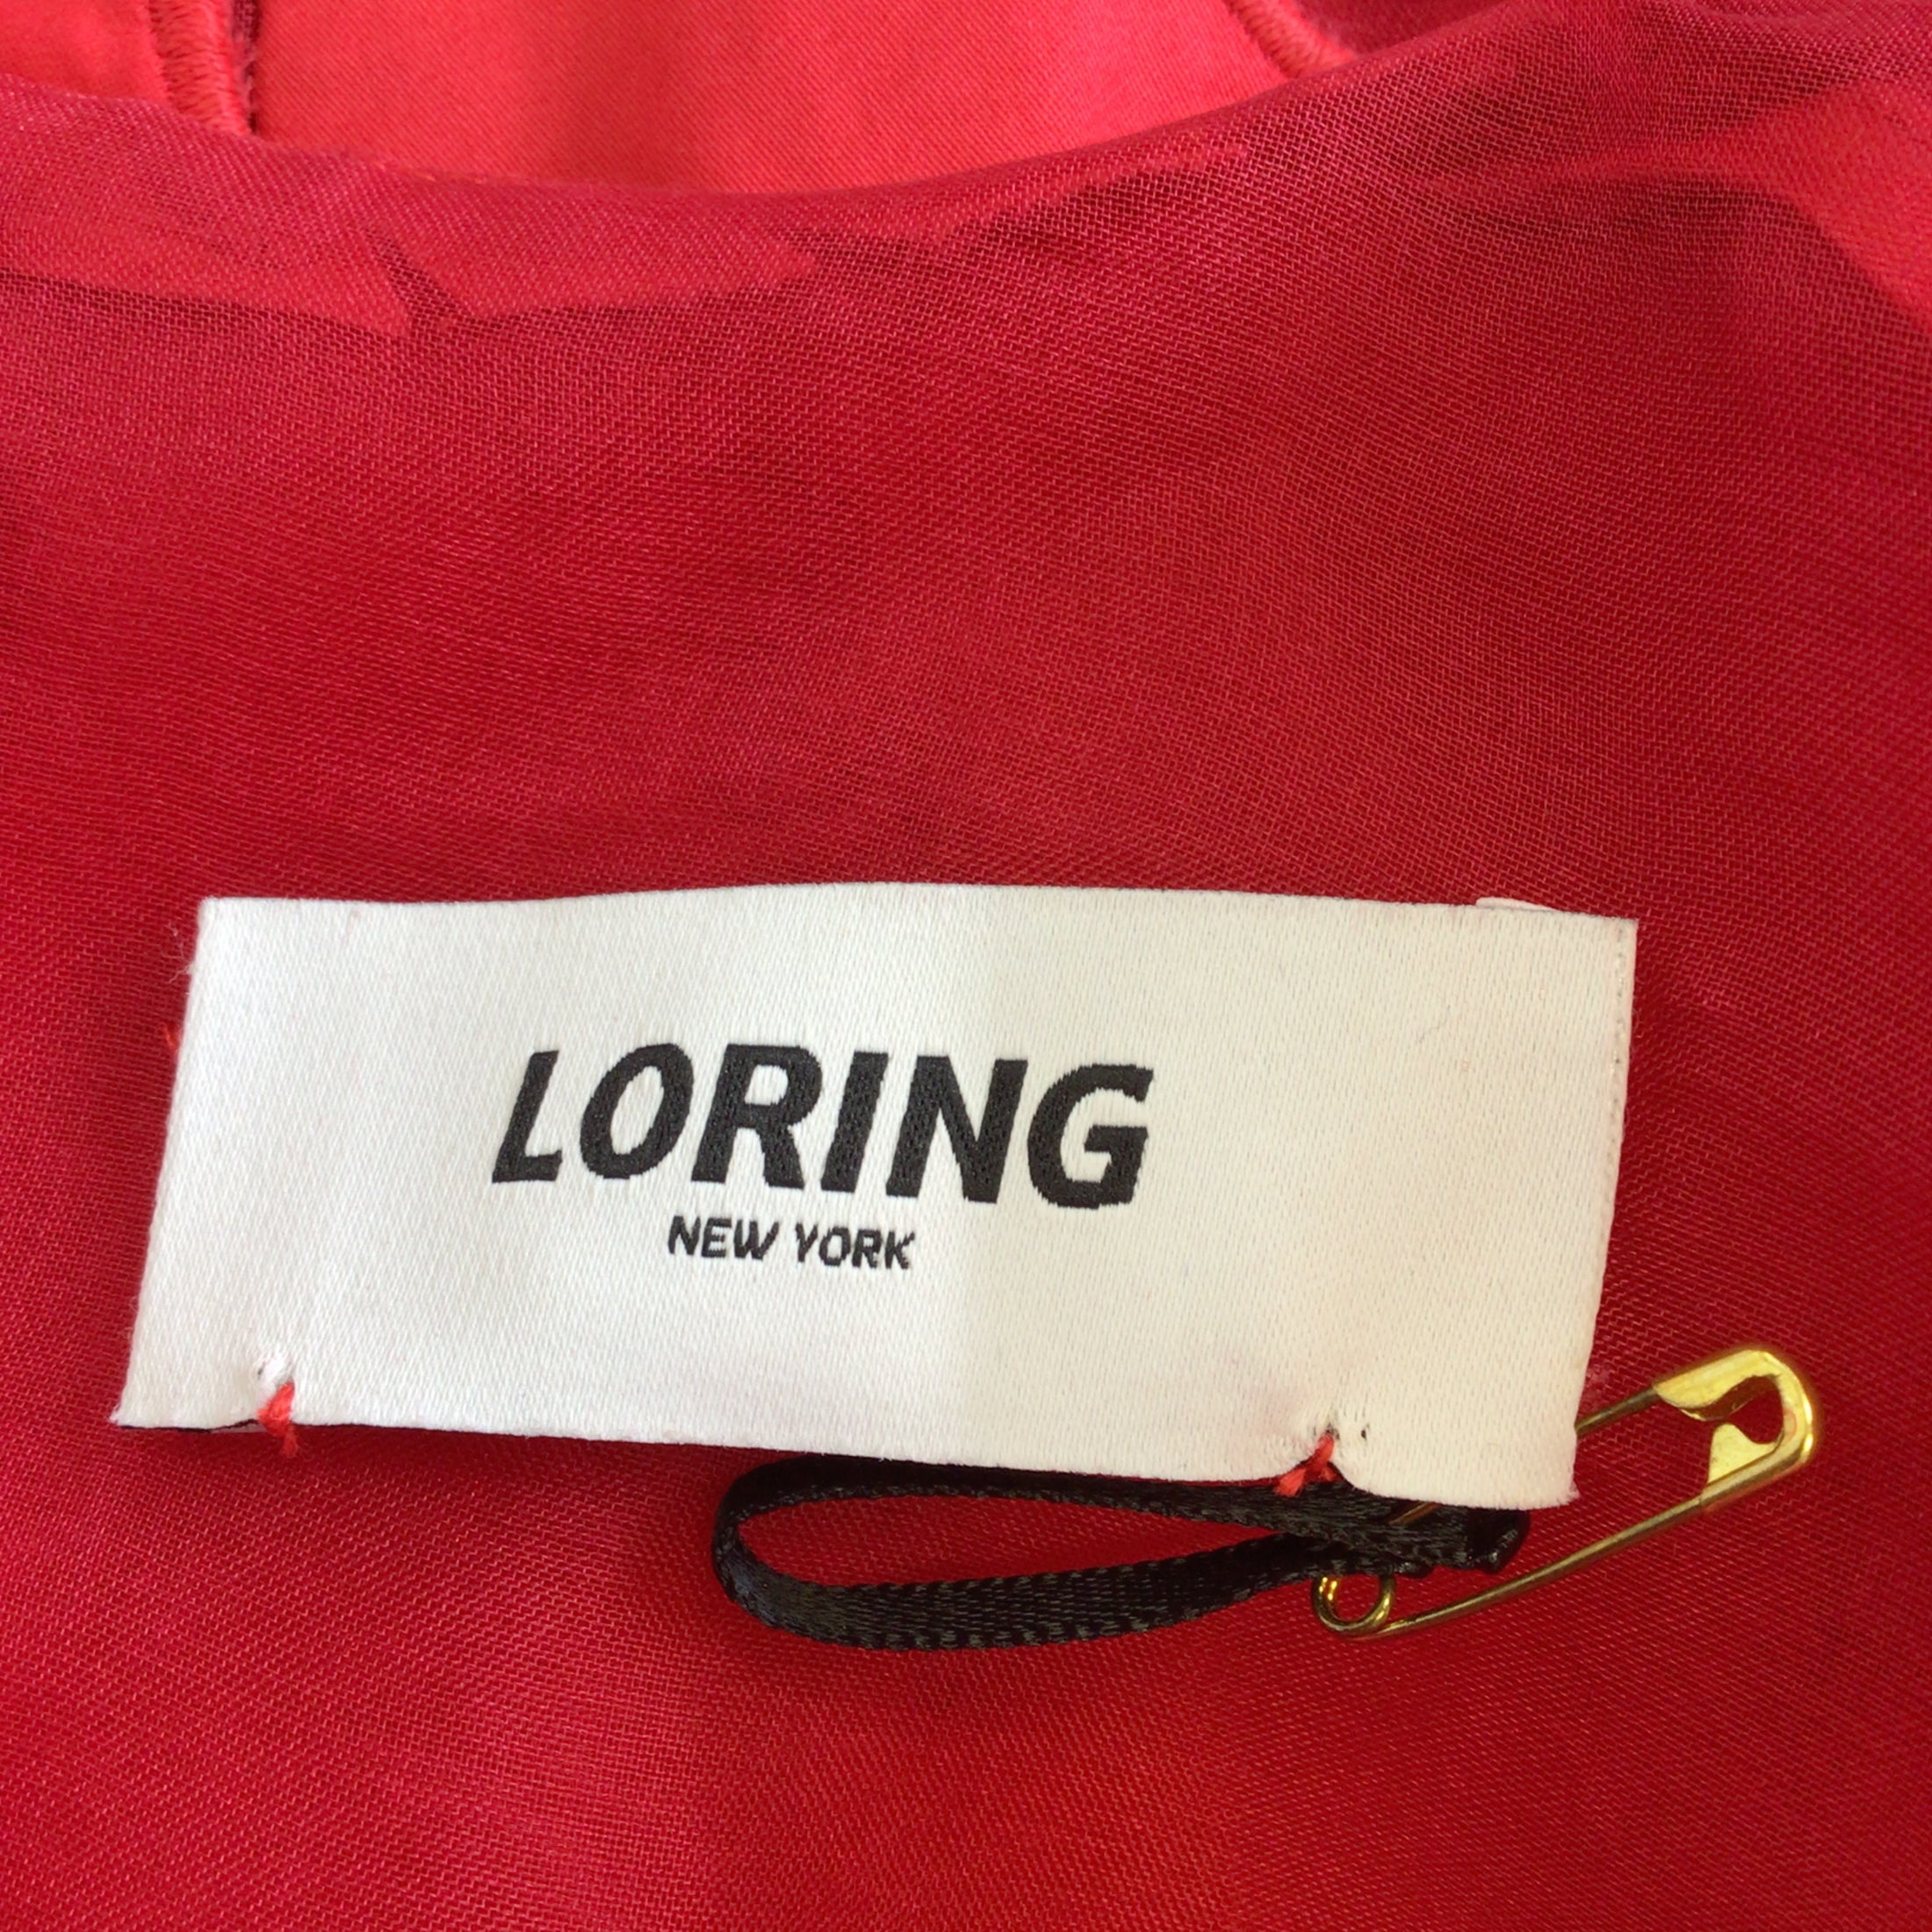 Loring Red Cut-Out Detail Sleeveless Cotton Dress